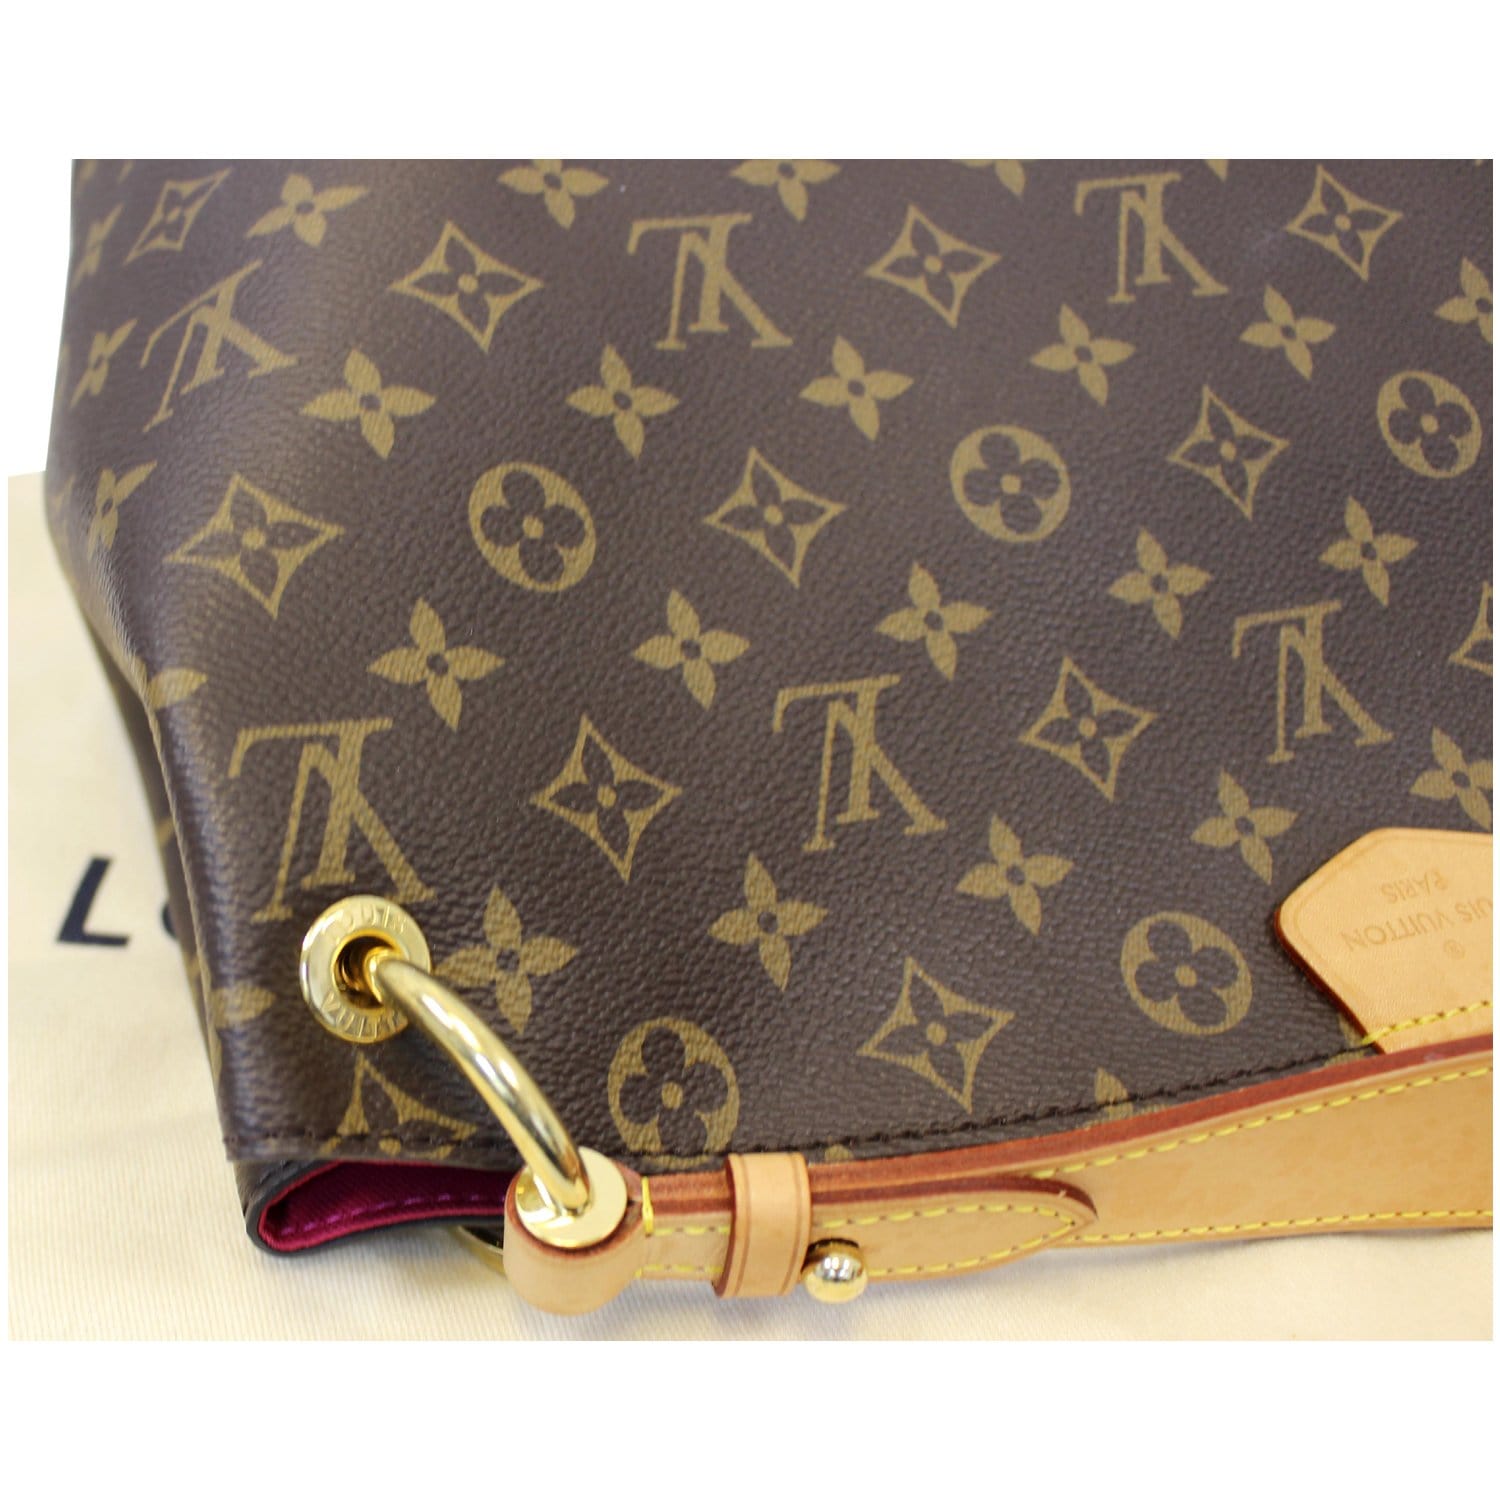 GRACEFUL PM Monogram Canvas in Women's Handbags collections by Louis Vuitton